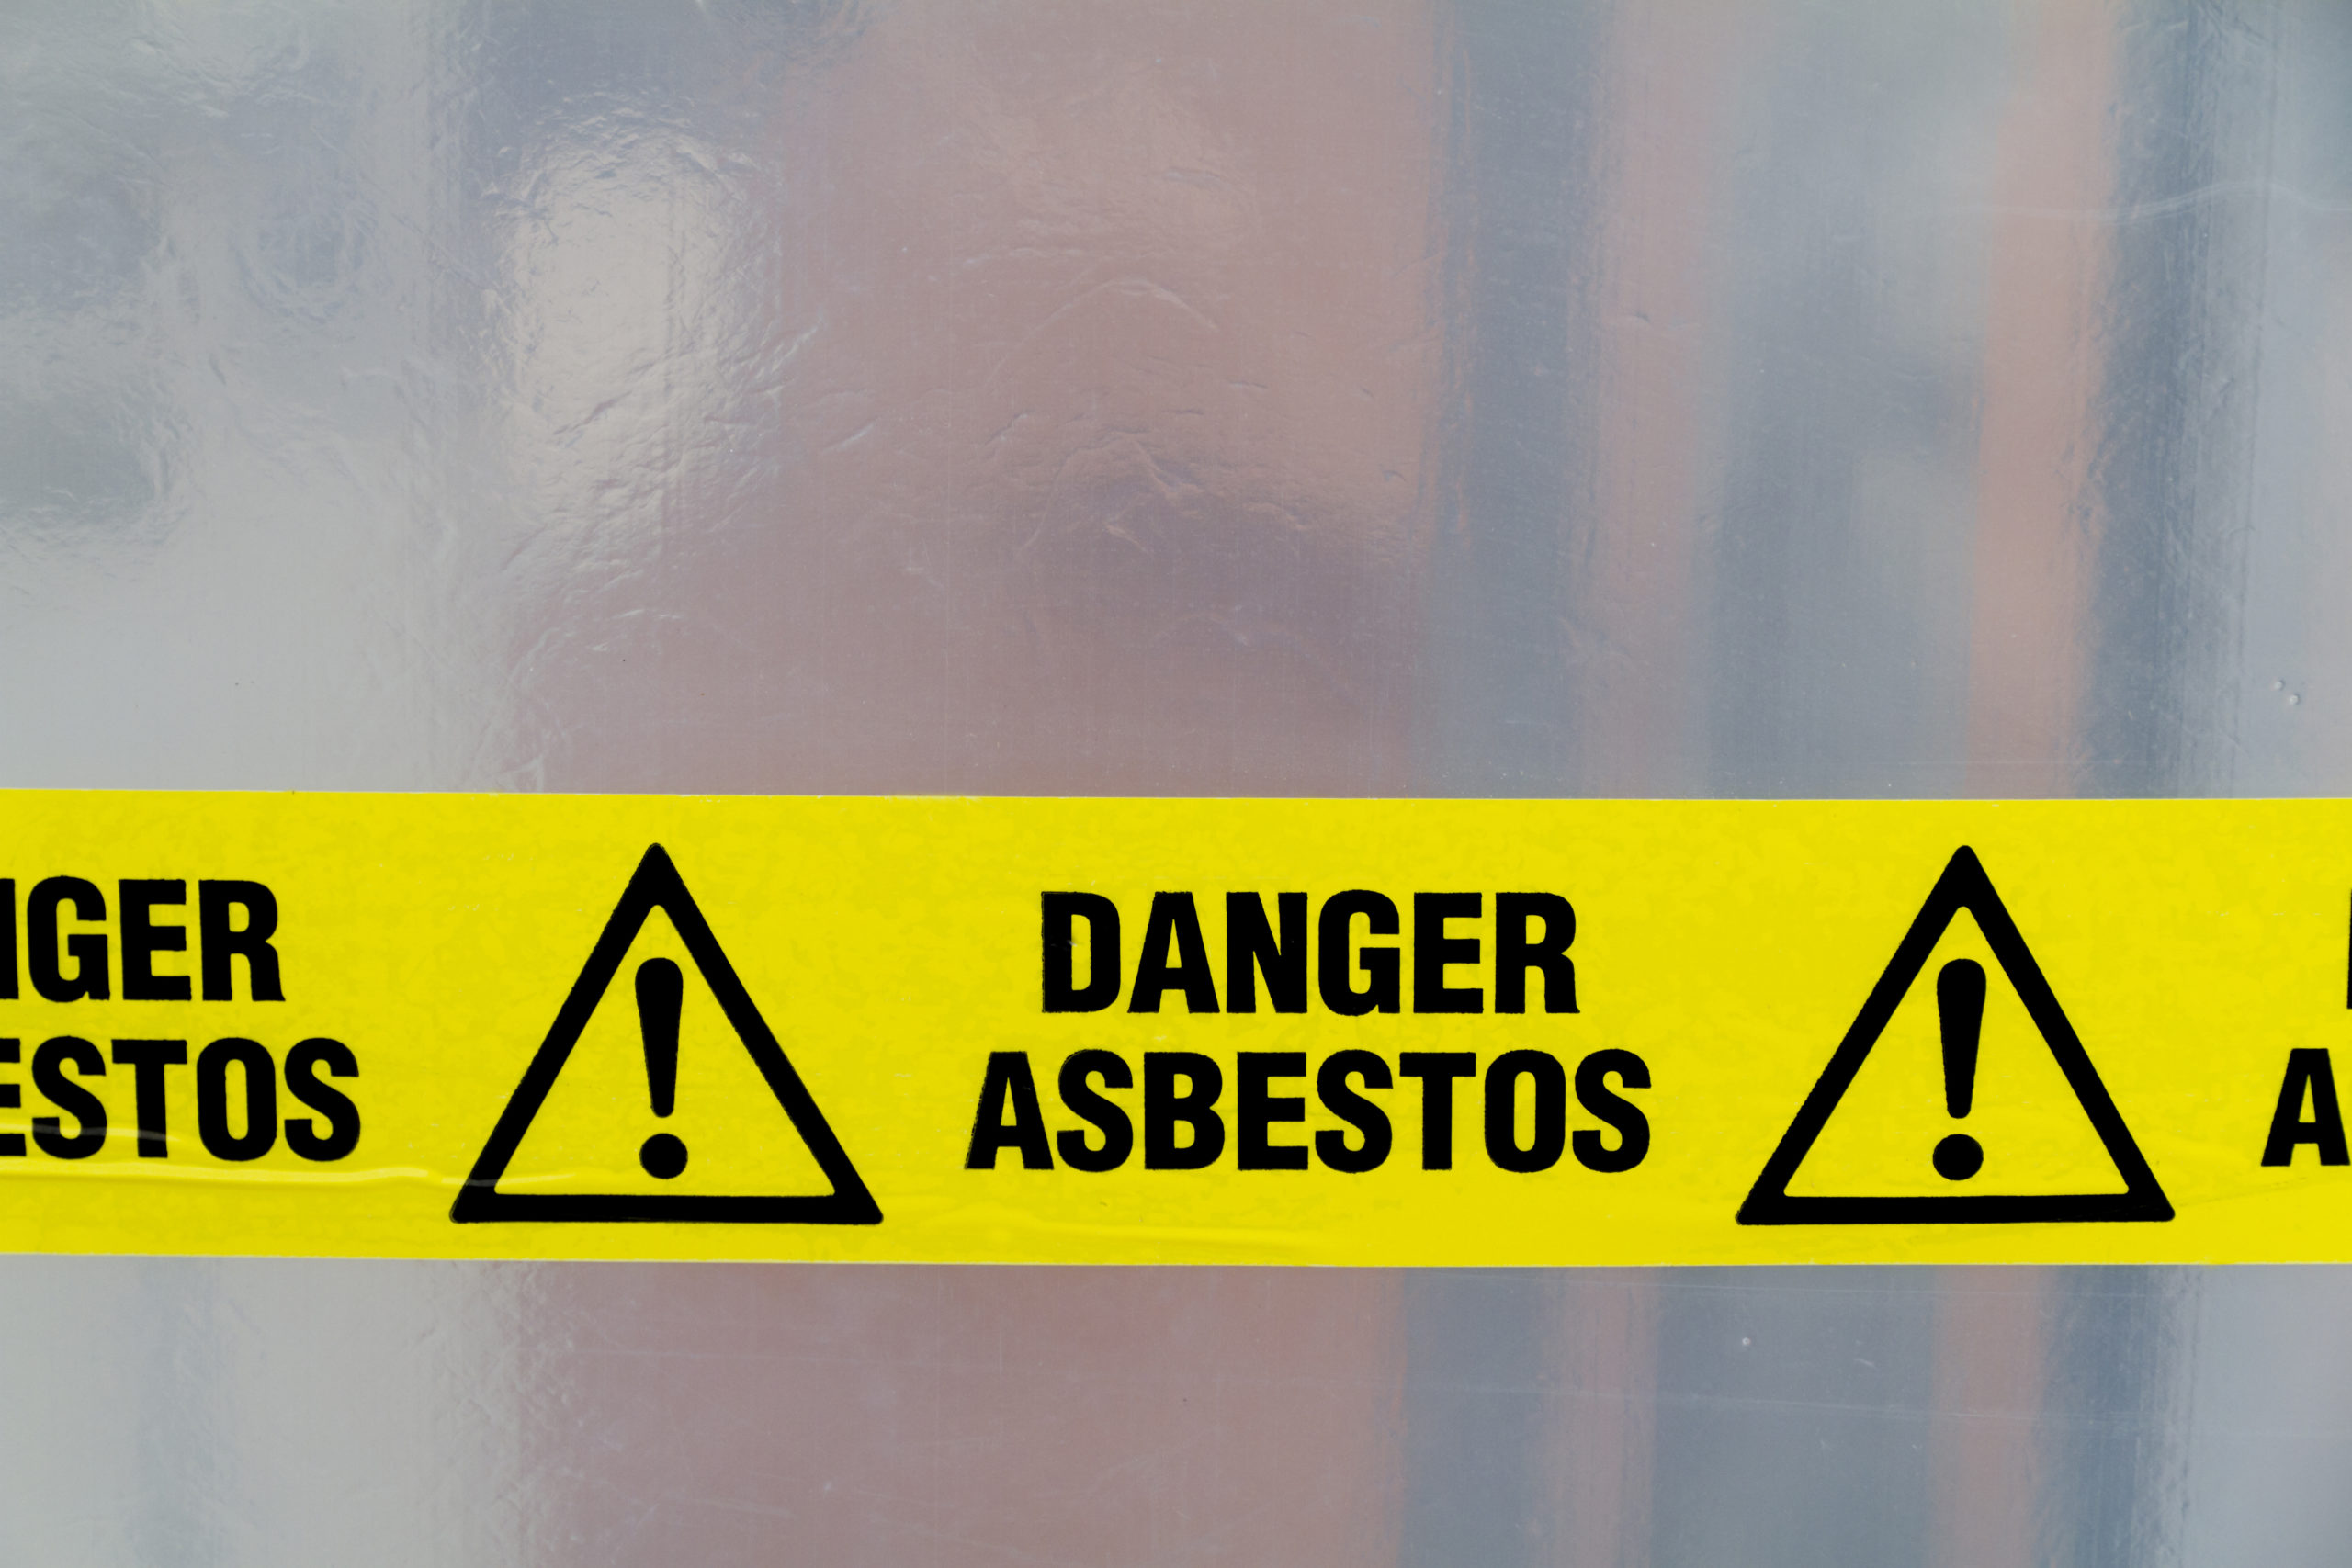 Inquest Hears of Derbyshire Man Exposed to Asbestos Working at a Power Station